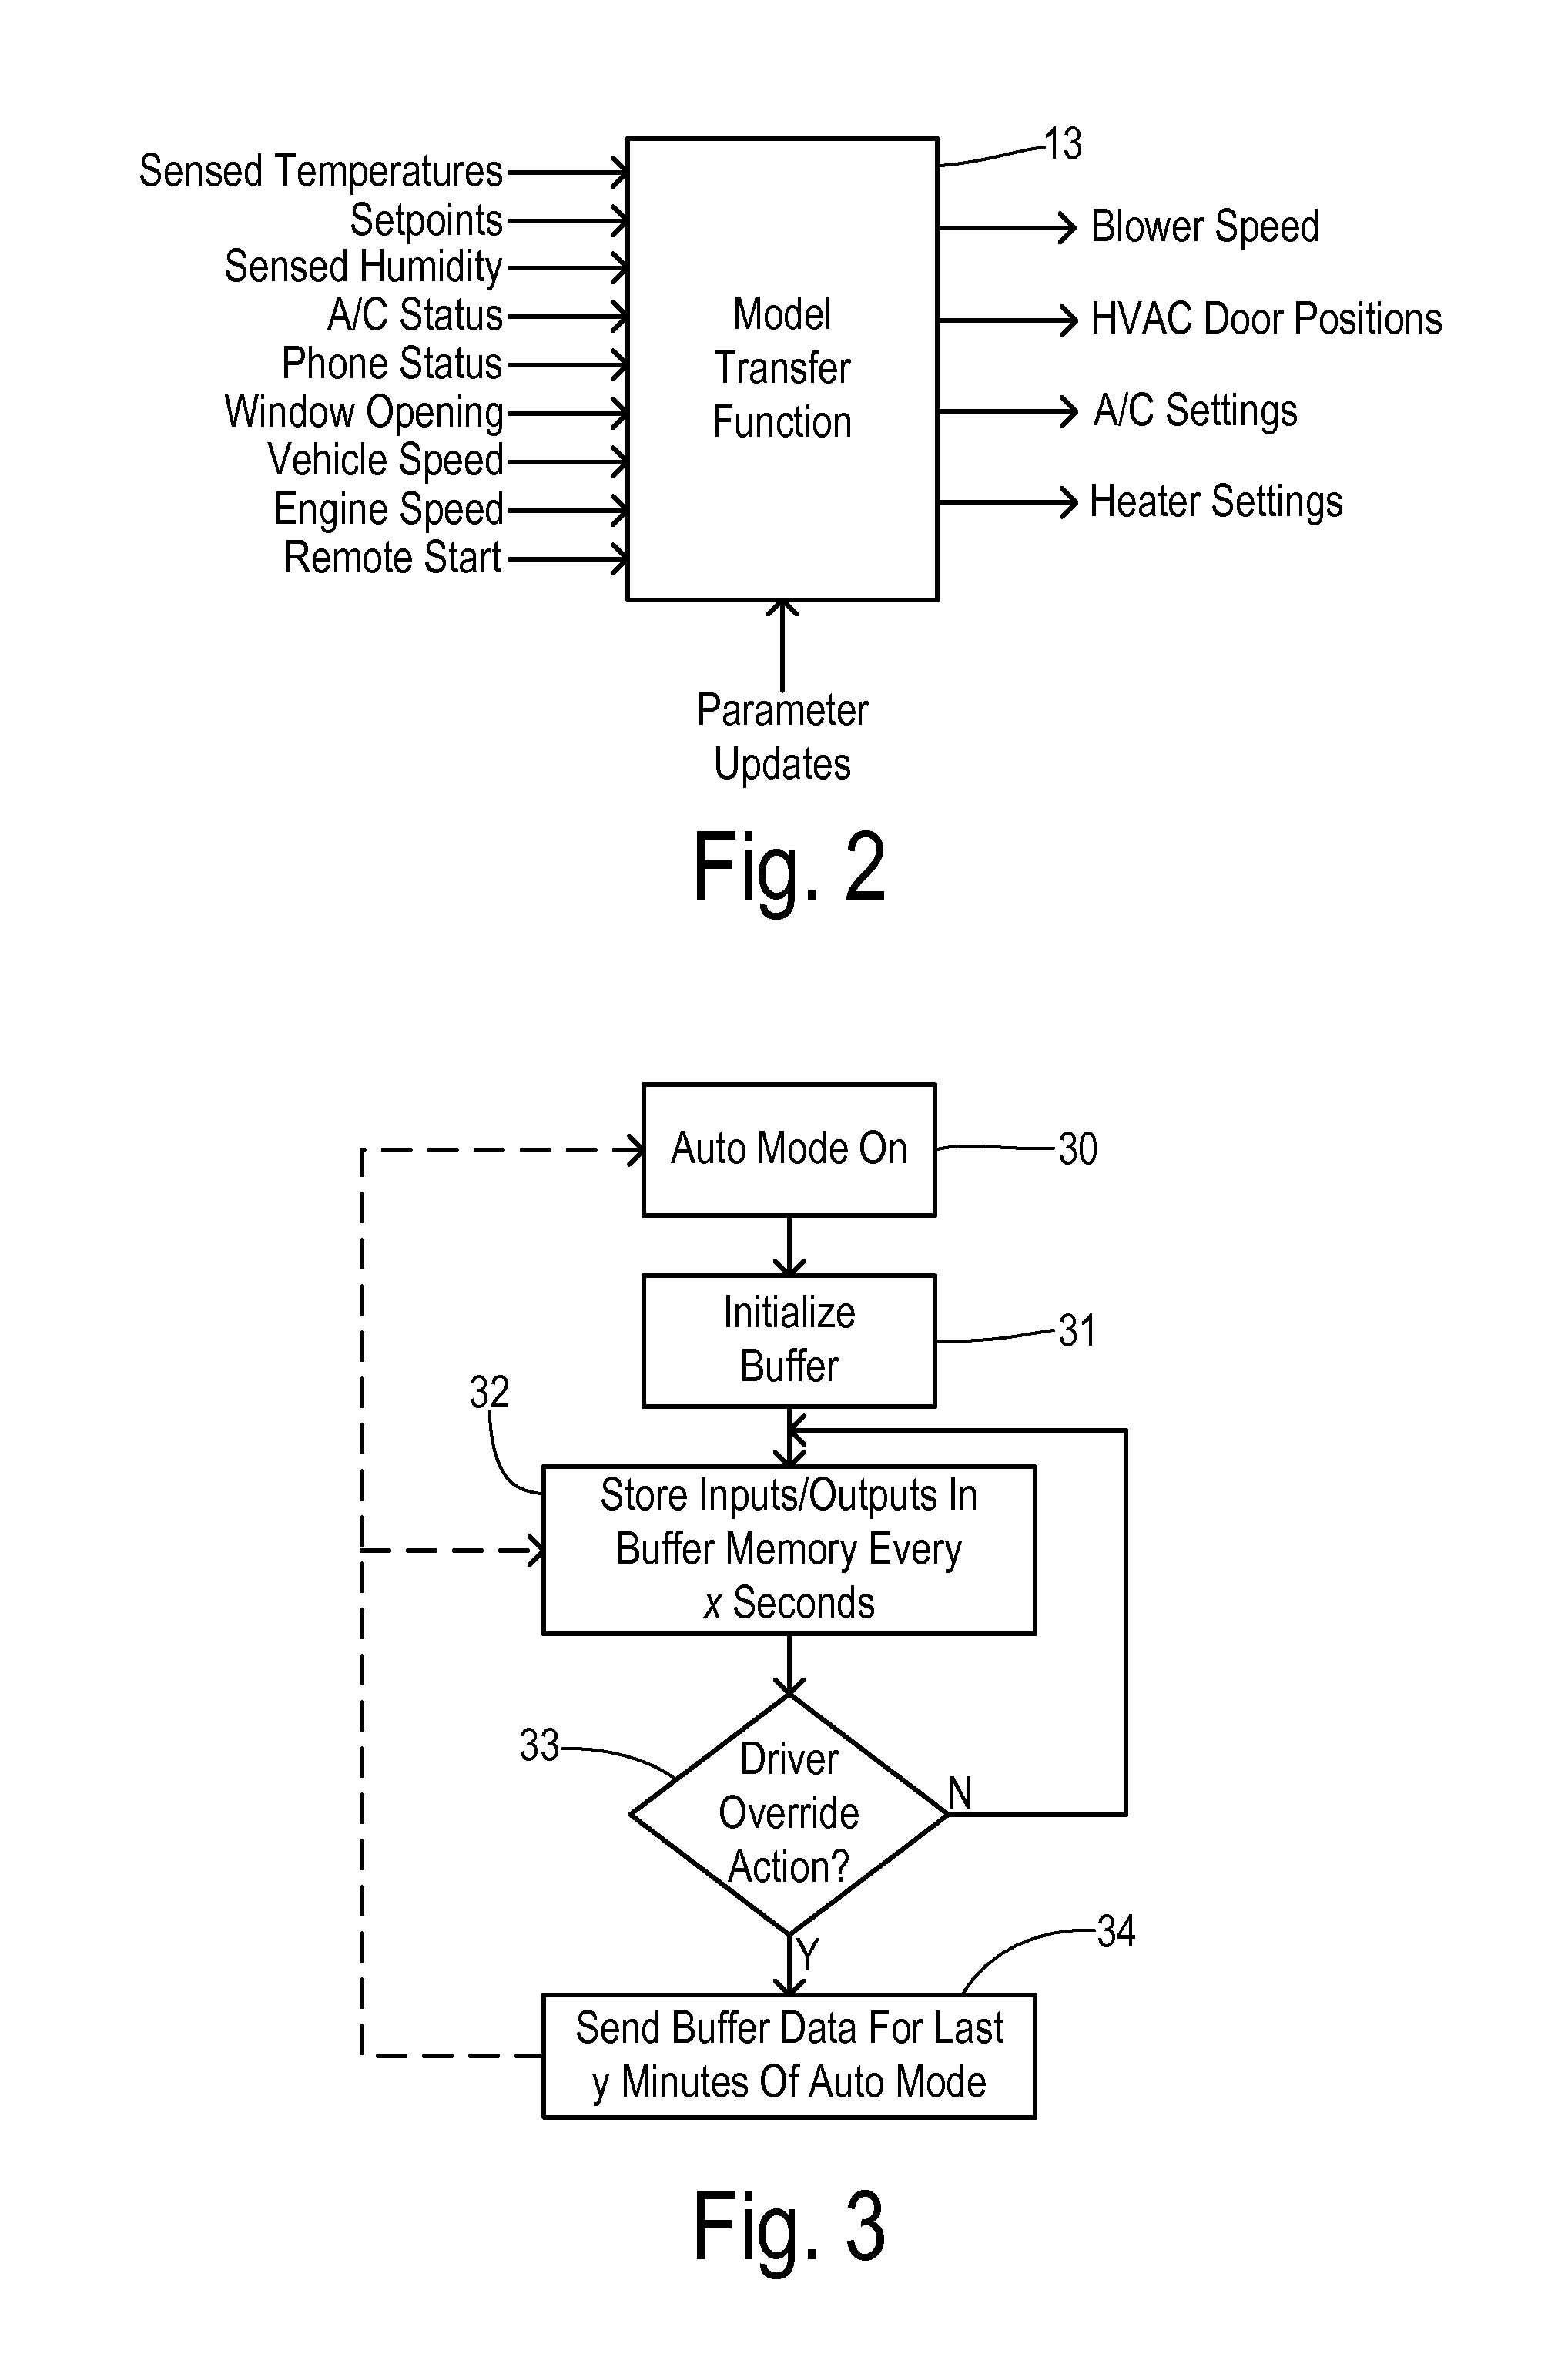 Automatic temperature override pattern recognition system